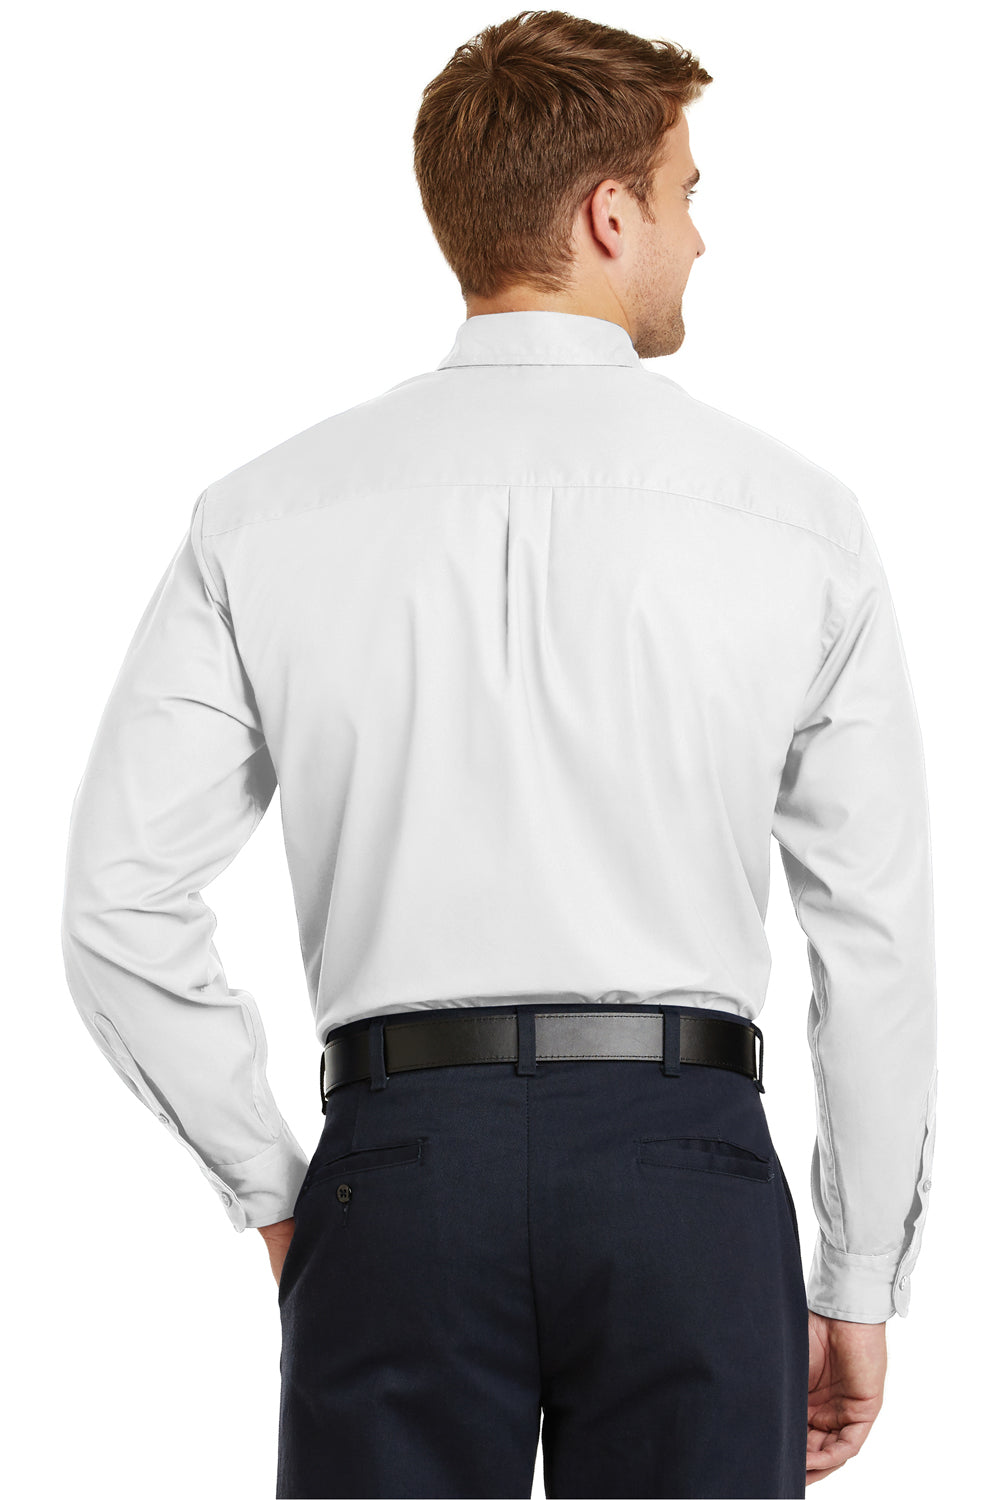 CornerStone SP17 Mens SuperPro Stain Resistant Long Sleeve Button Down Shirt w/ Pocket White Back